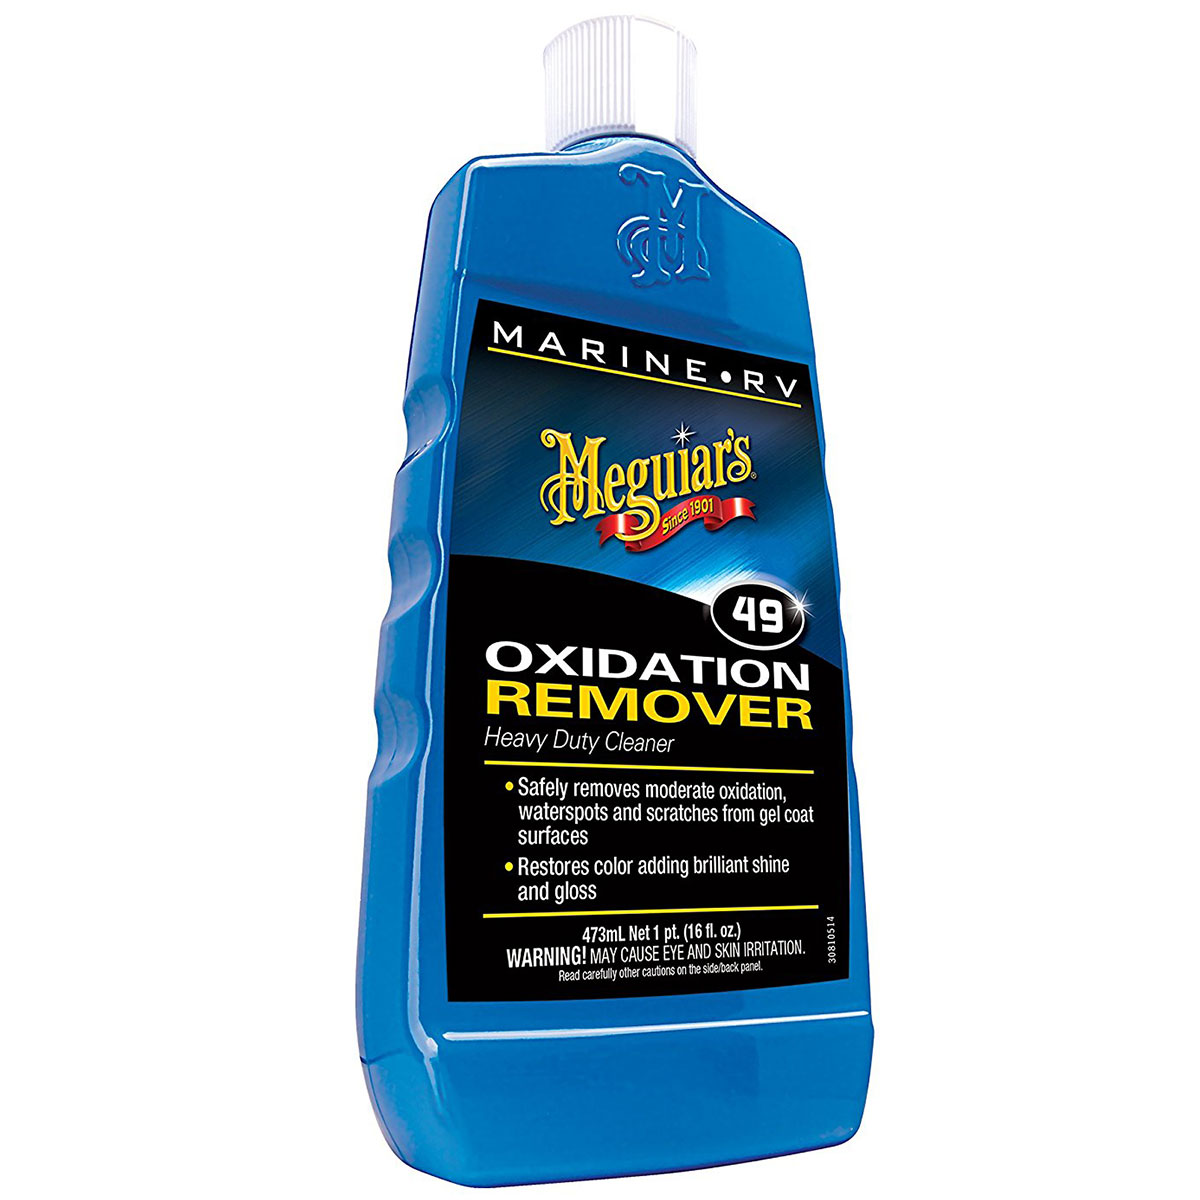 Oxidation Remover Meguiars